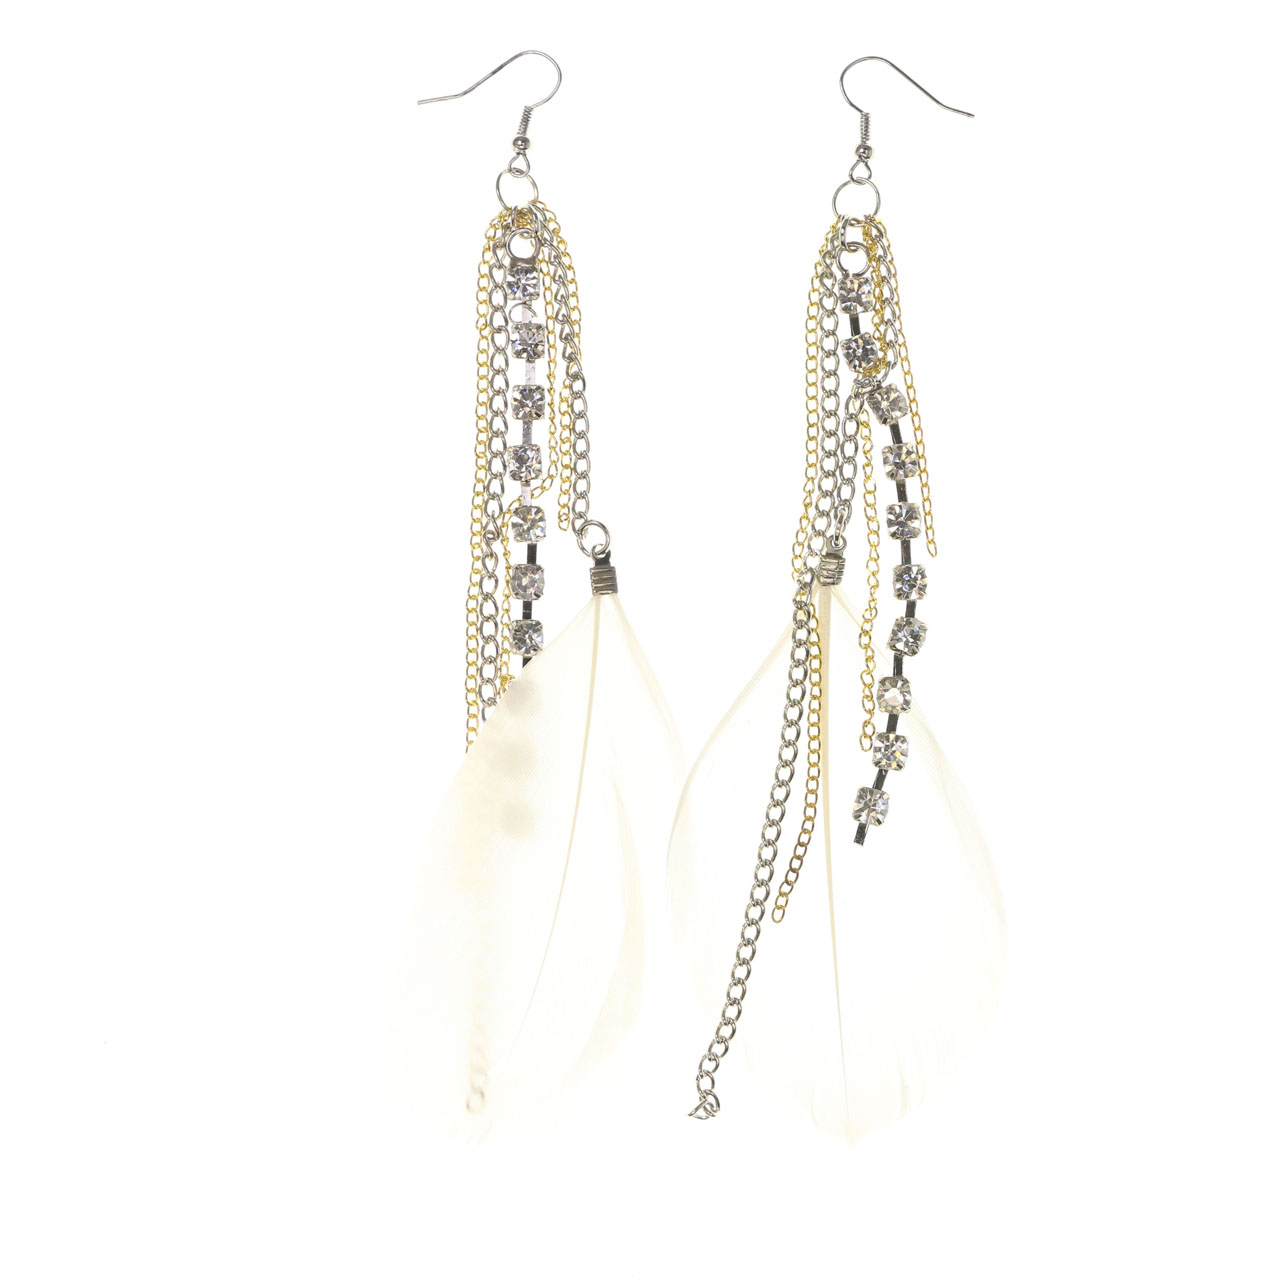 MI AMORE Feather Dangle-Earrings With Crystal Accents White & Silver-Tone Colored #5034